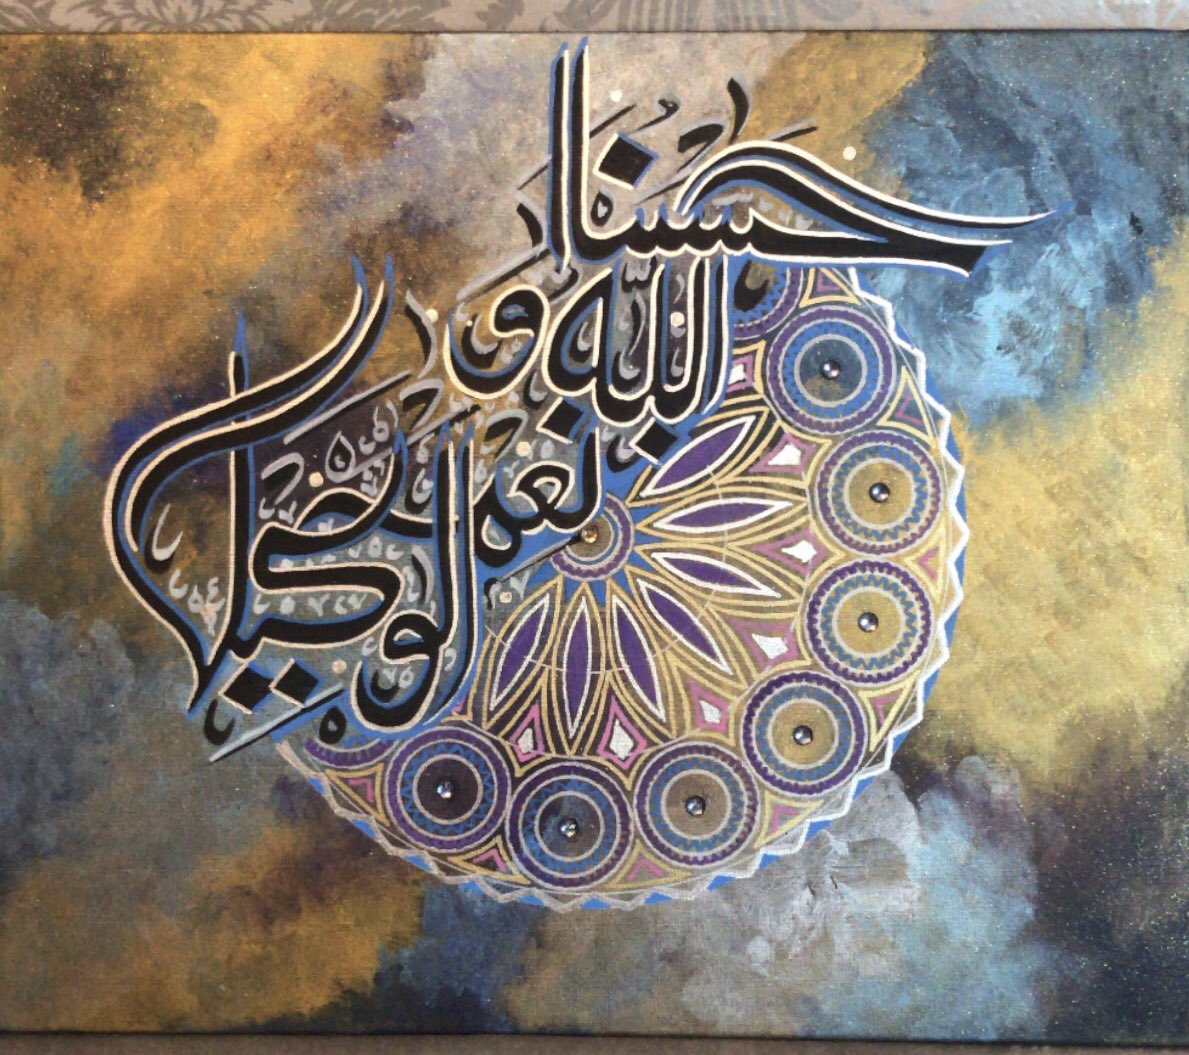 50cm x 60cm canvas, available for purchase Thoroughly enjoyed creating this alhamdulilah ZahrArtsInstagram: zm_canvas_artEtsy:  https://etsy.me/38qEr2H 